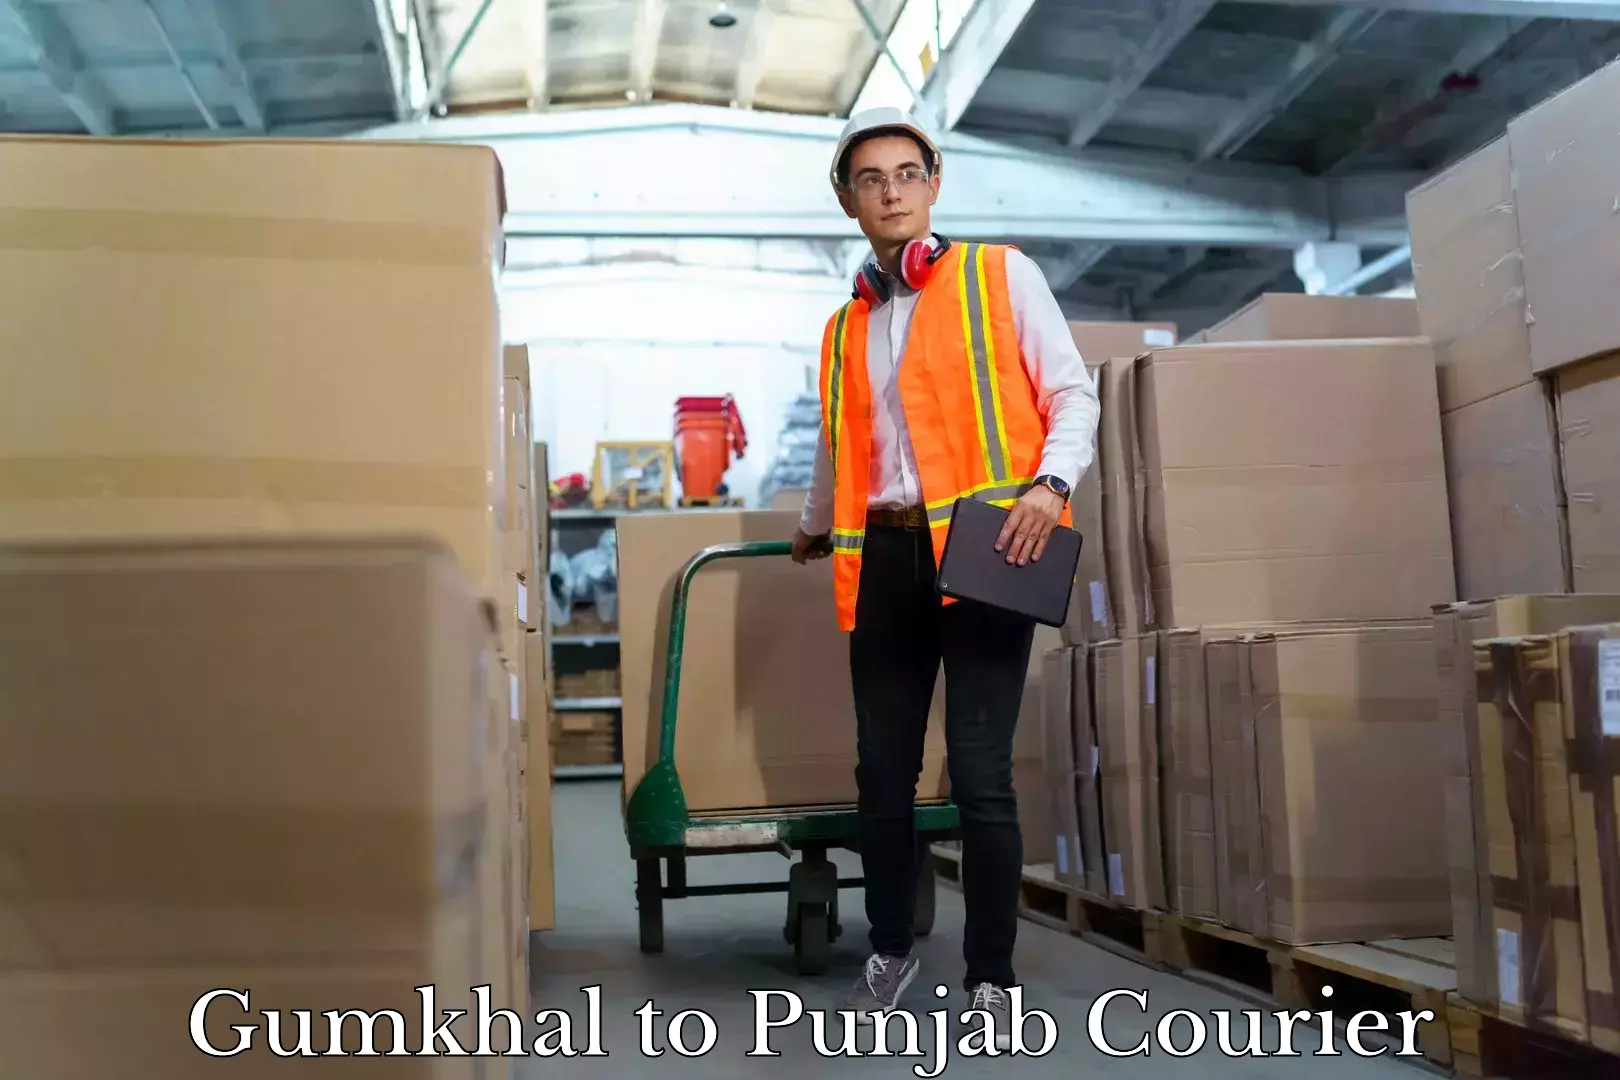 Professional packing services in Gumkhal to Dinanagar